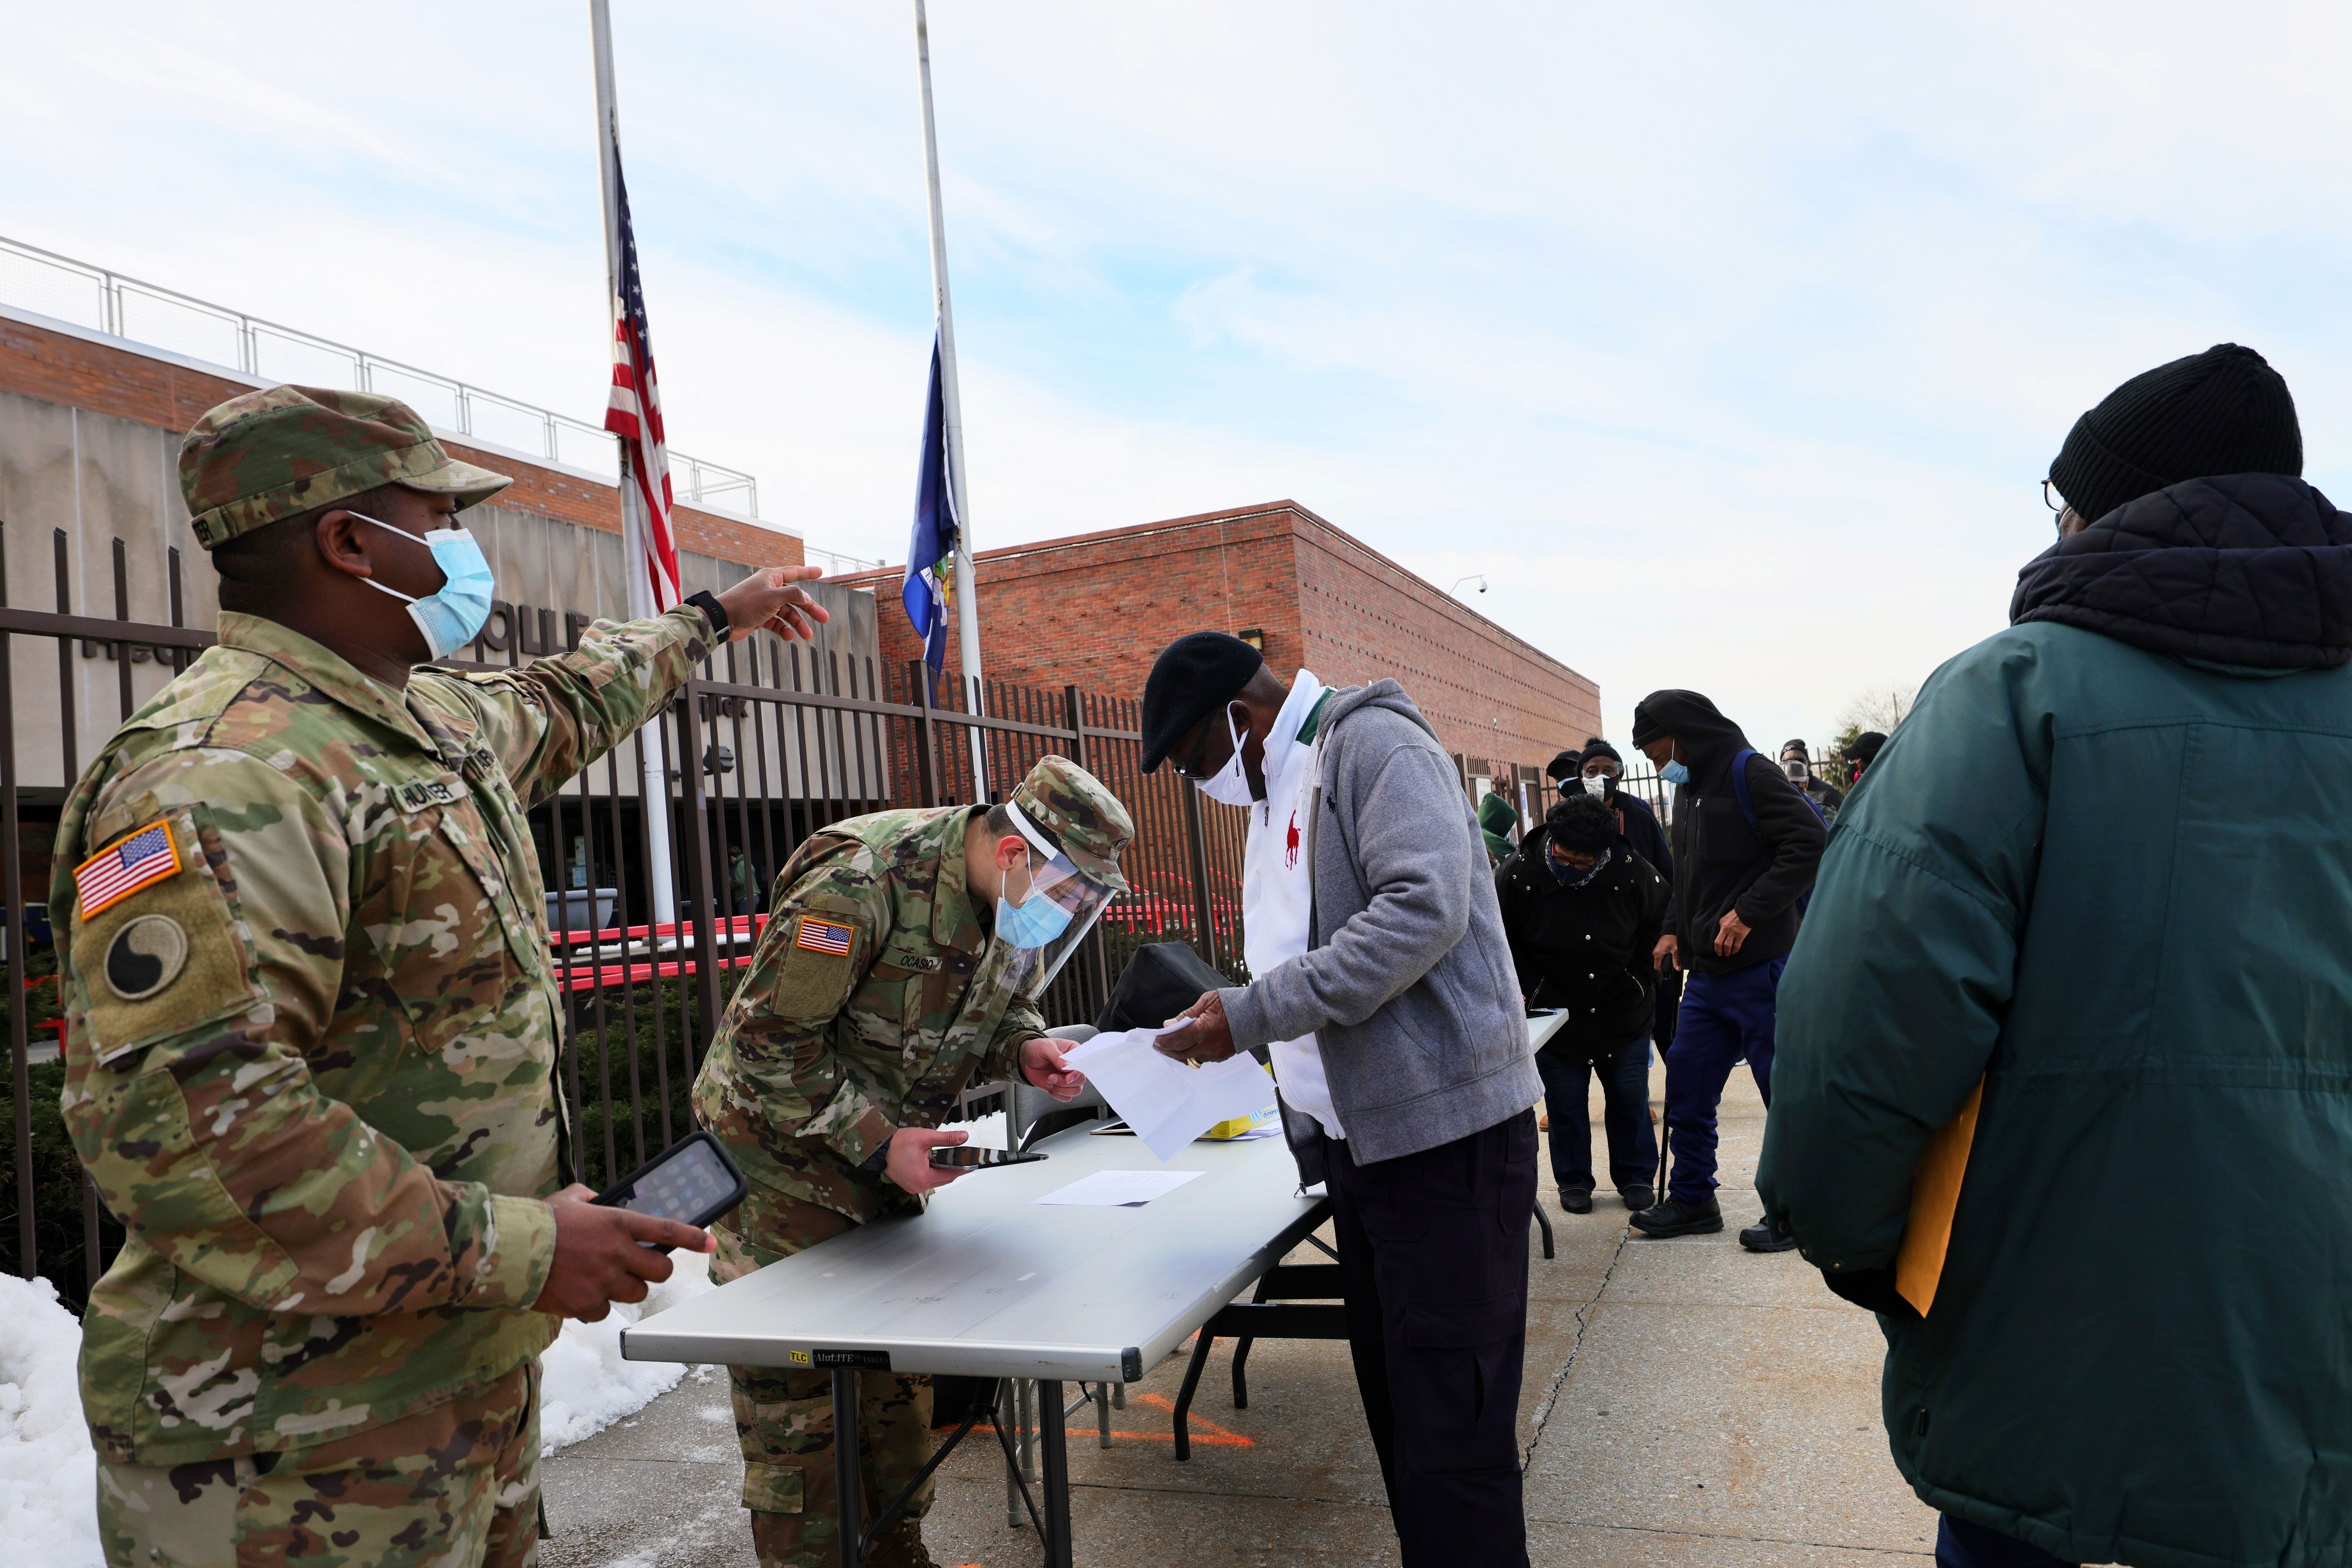 Members of the National Guard help people sign up for their Covid-19 vaccination appointments at York College in Queens, New York, on February 24.